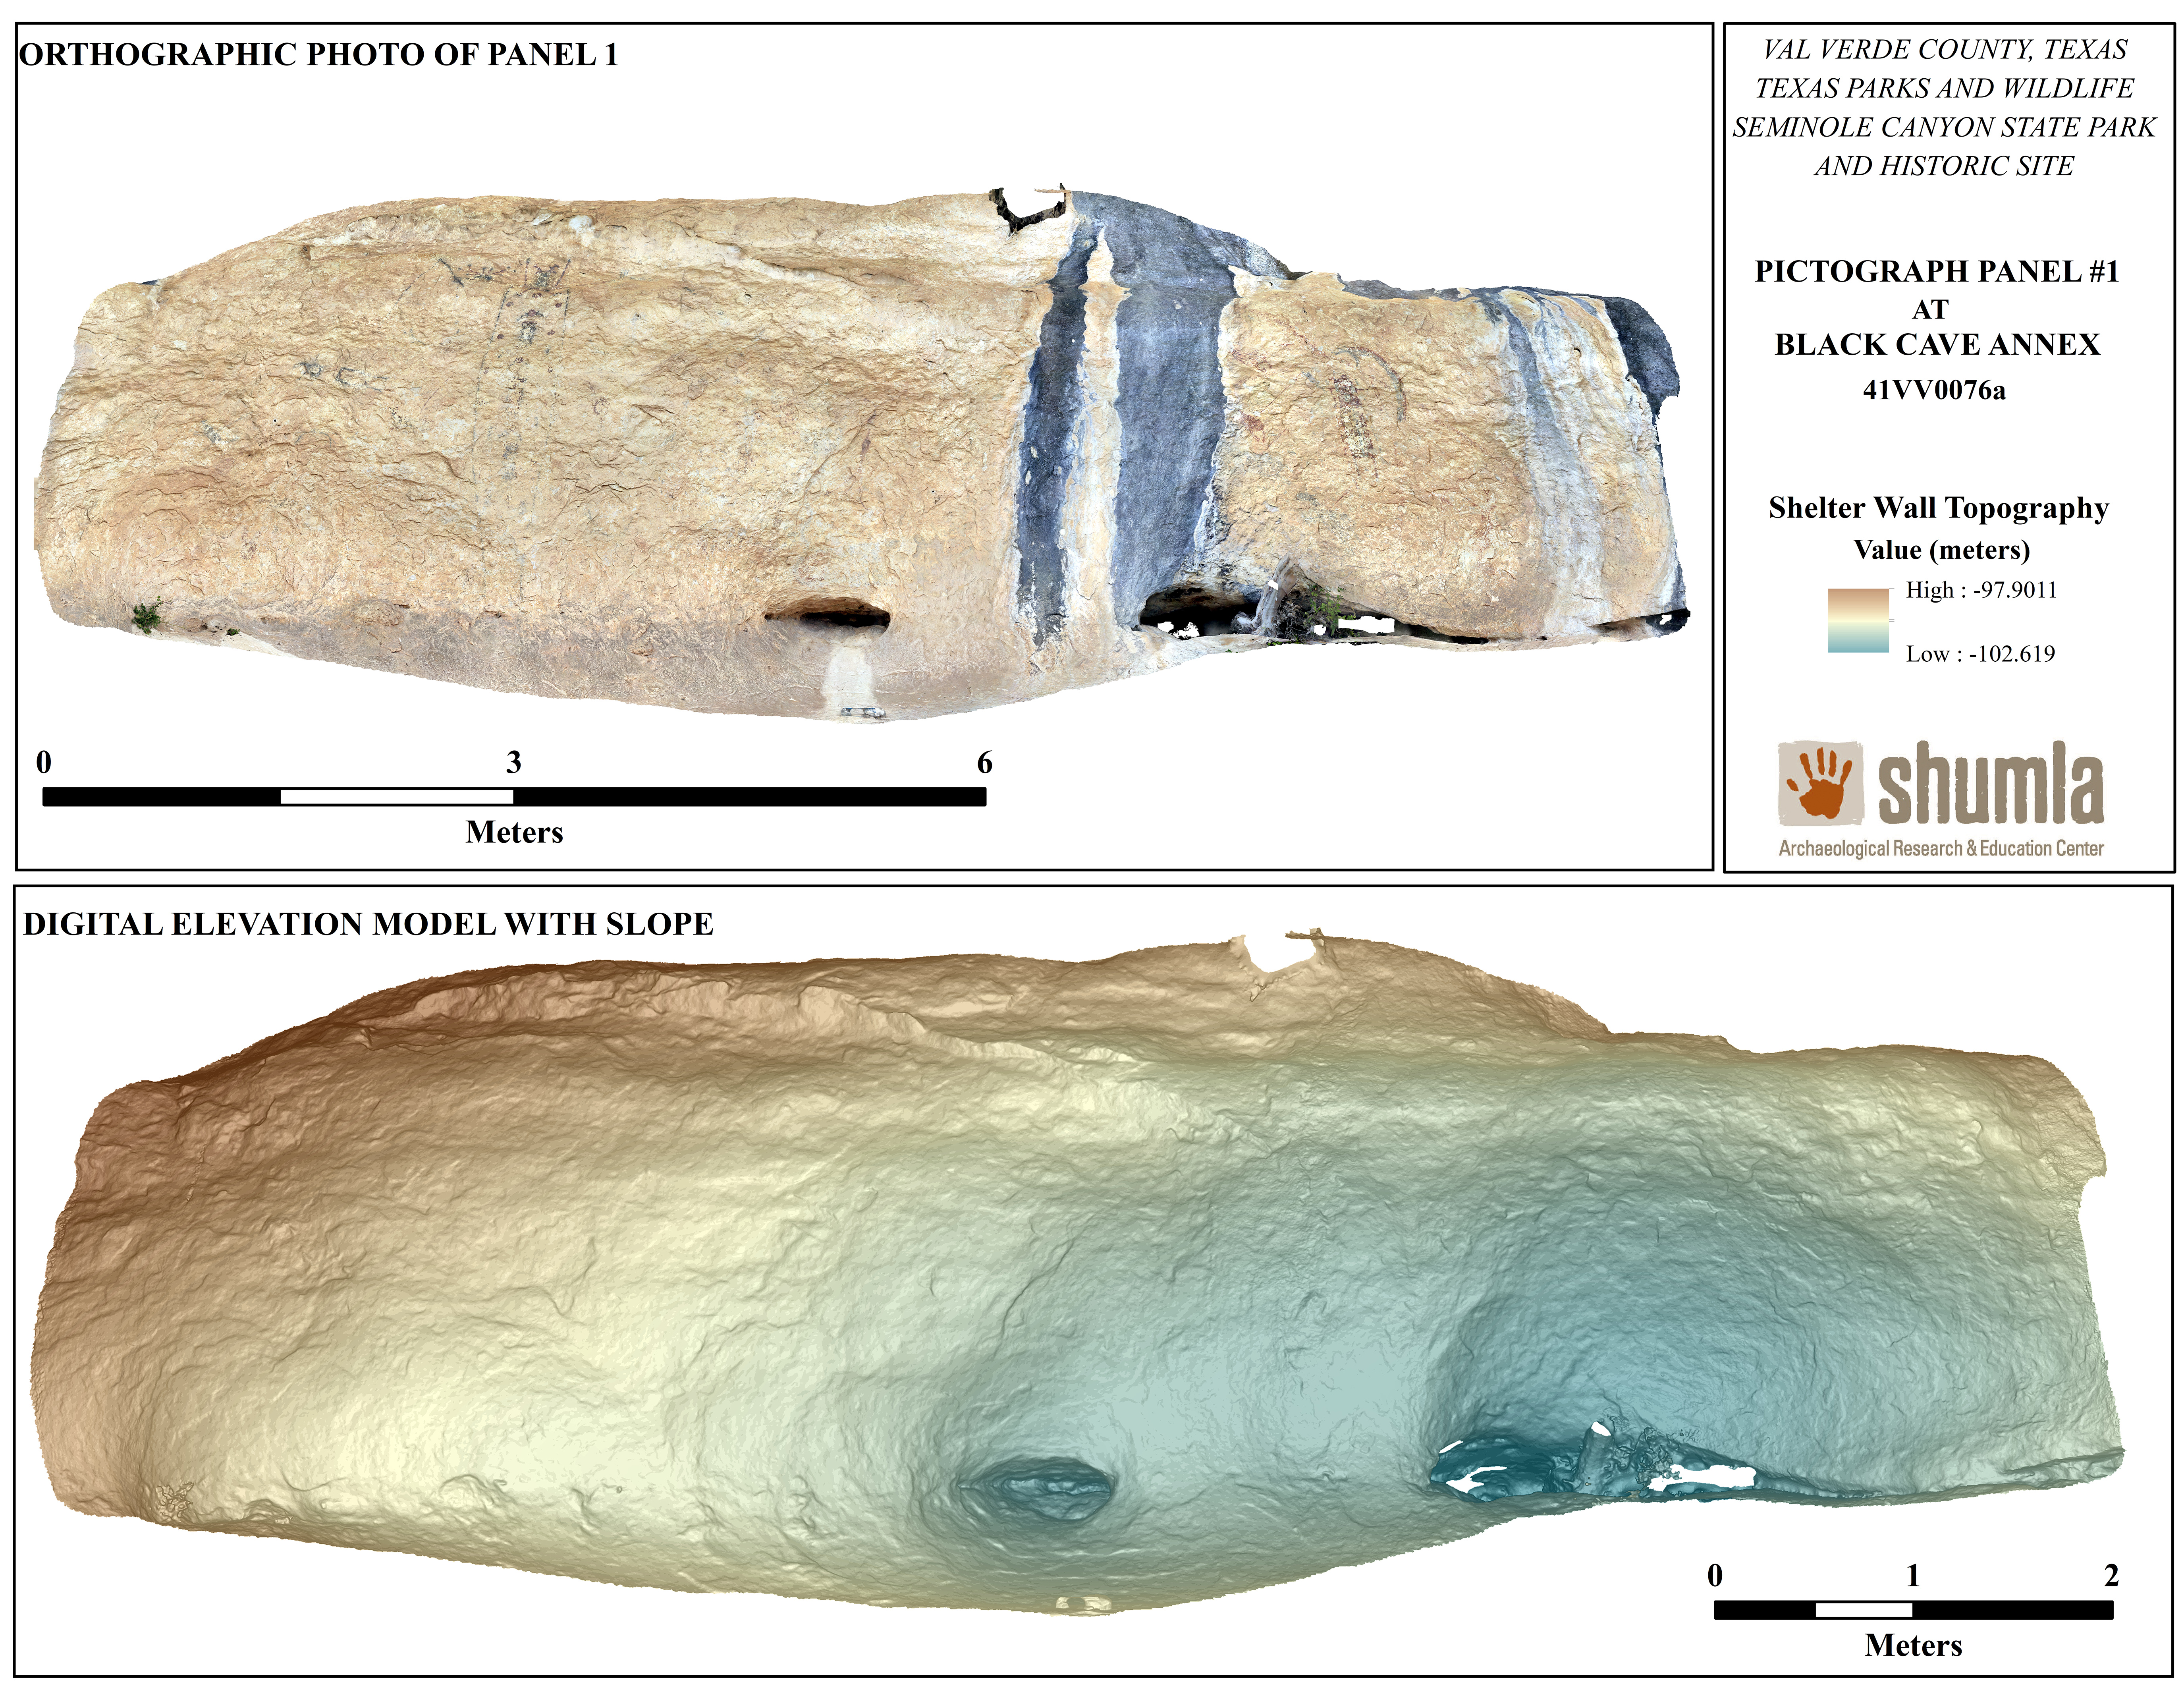 Orthographic photo and Digital Elevation Model (DEM) of Black Cave Annex exported from the SfM 3D model and imported into a mapping software.